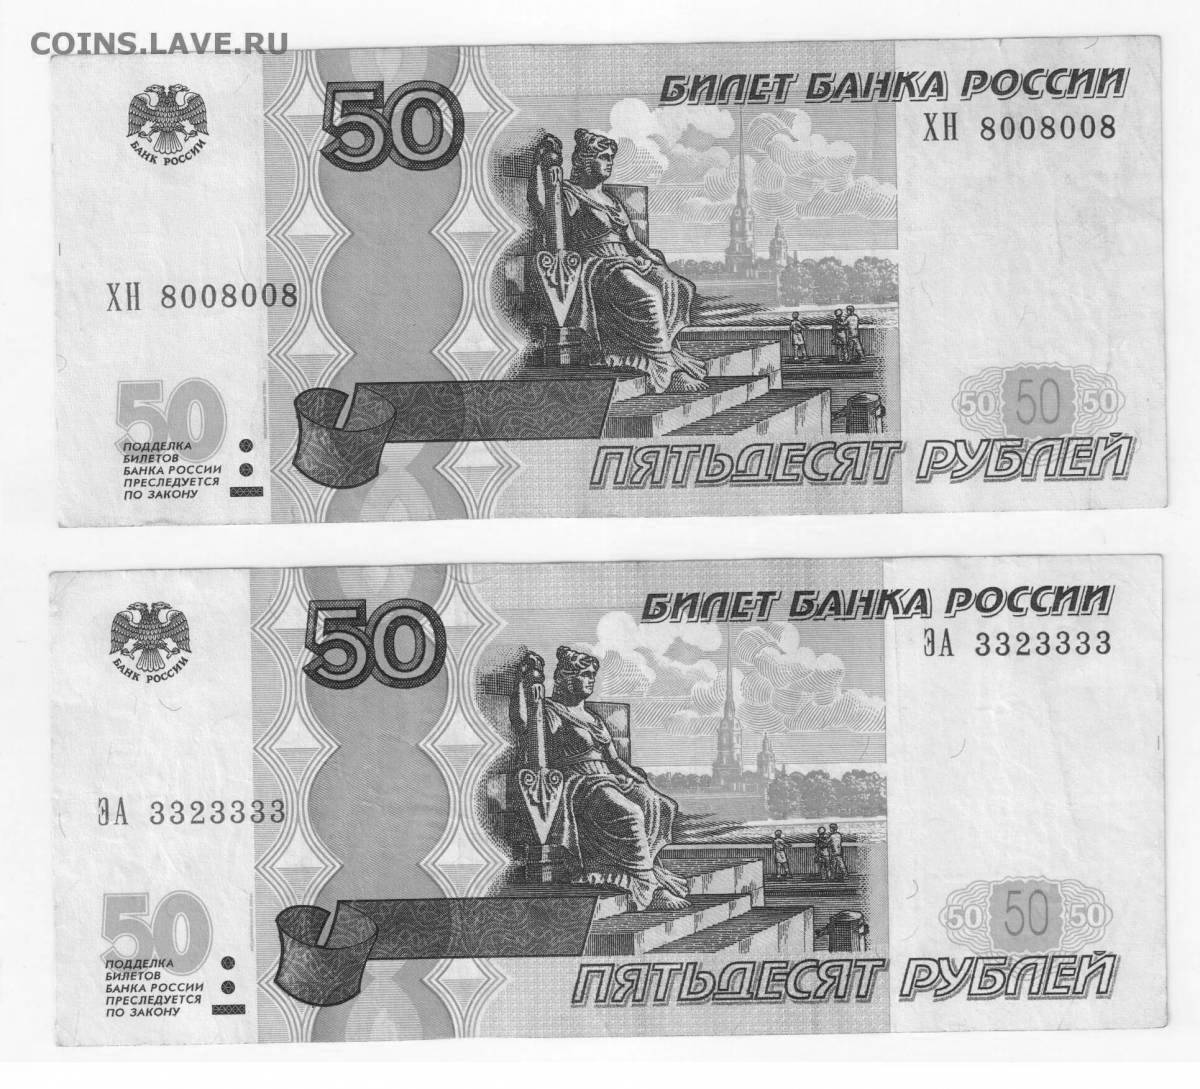 50 rubles #7